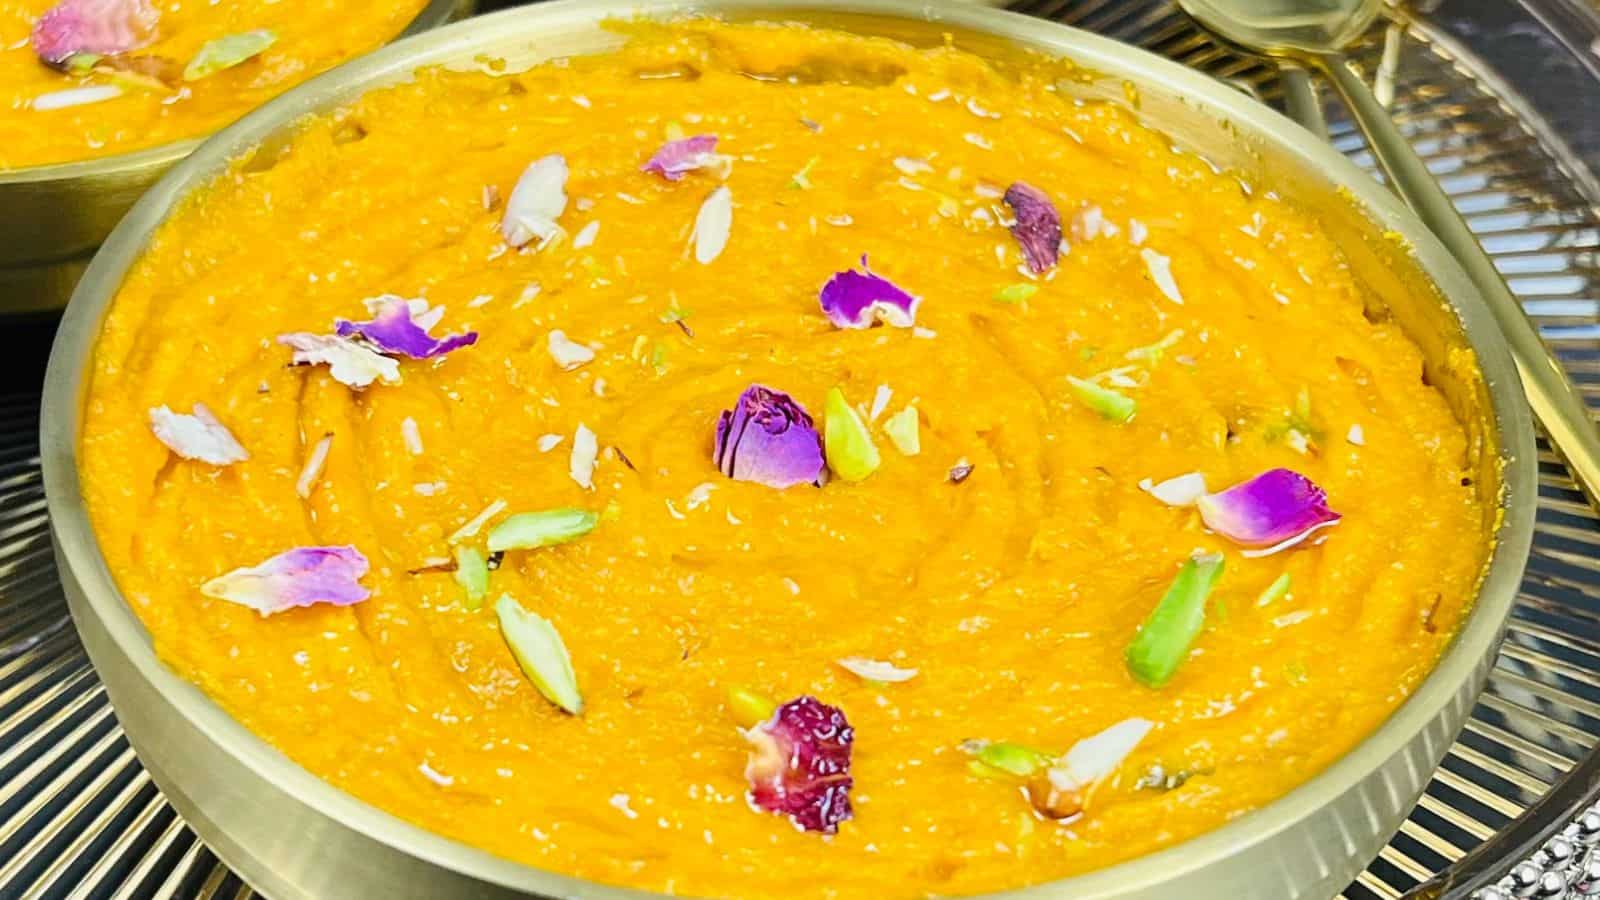 A bowl of orange-colored dessert garnished with flower petals and nuts, placed on a metallic surface.